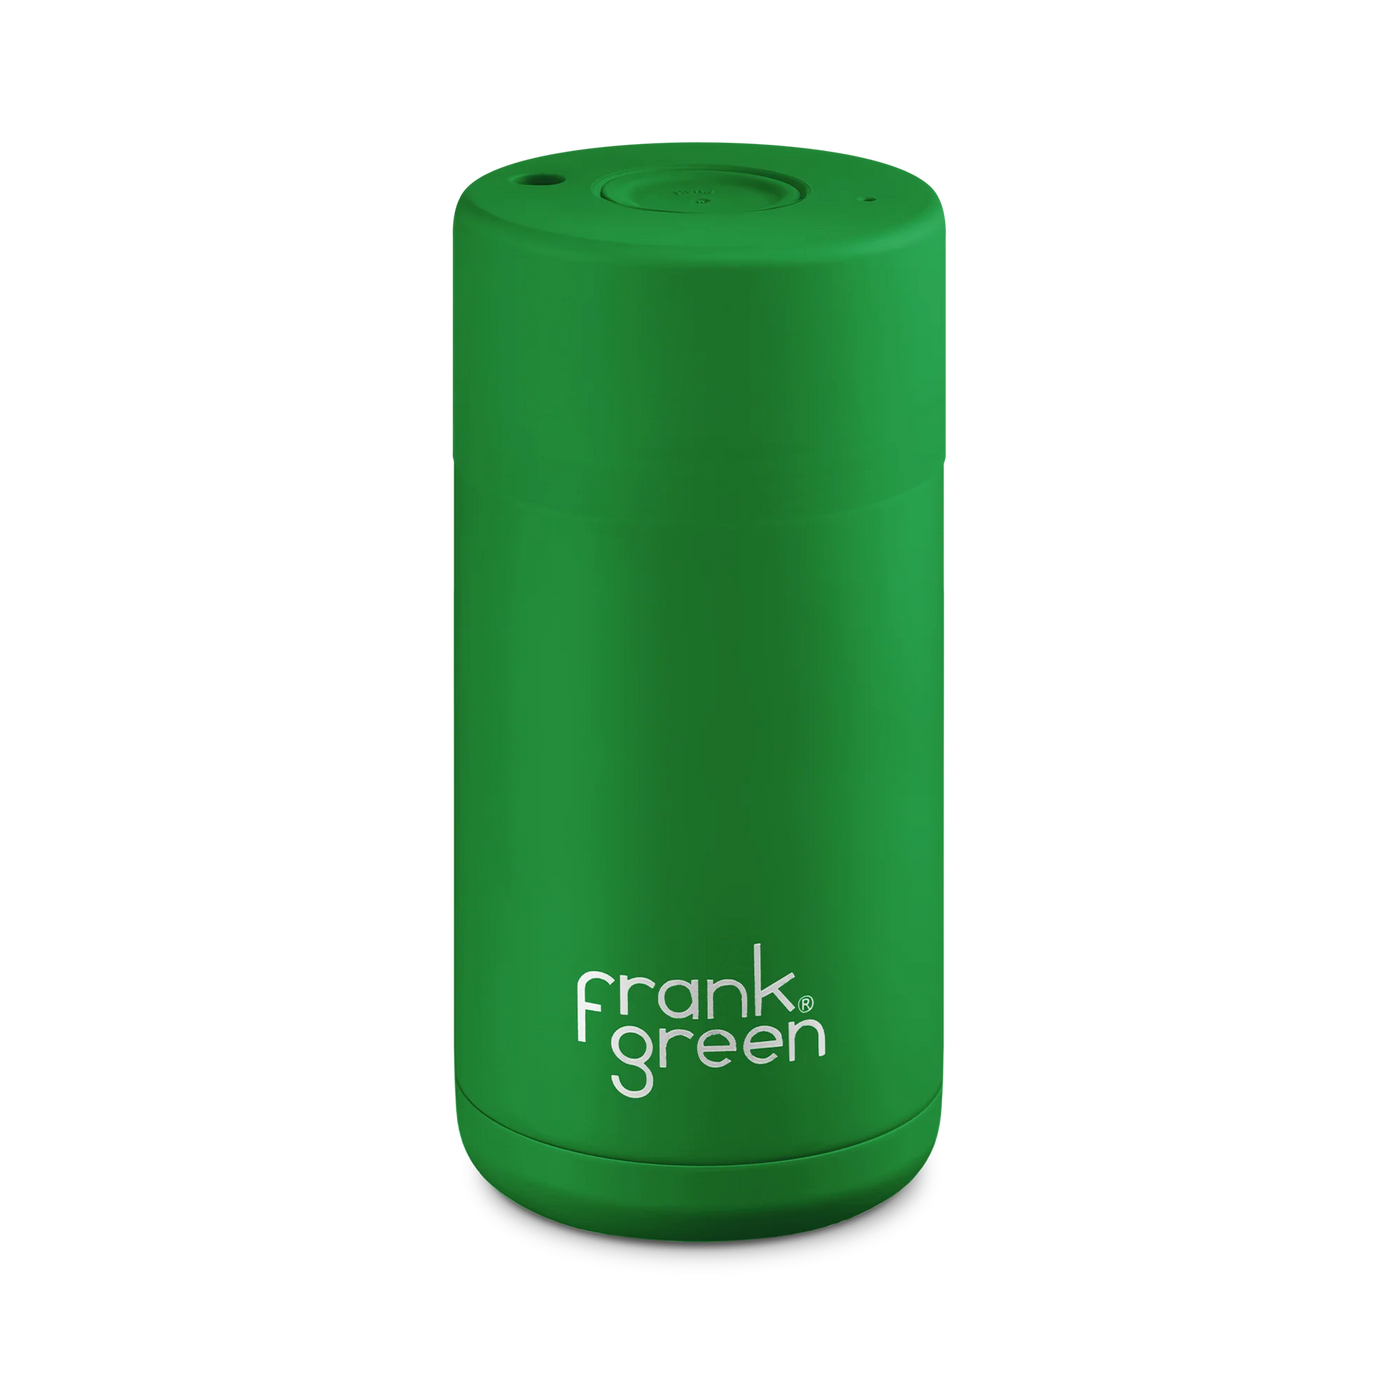 Frank Green Limited Edition Ceramic Reusable Cup 12oz - Evergreen Mealtime Frank Green 